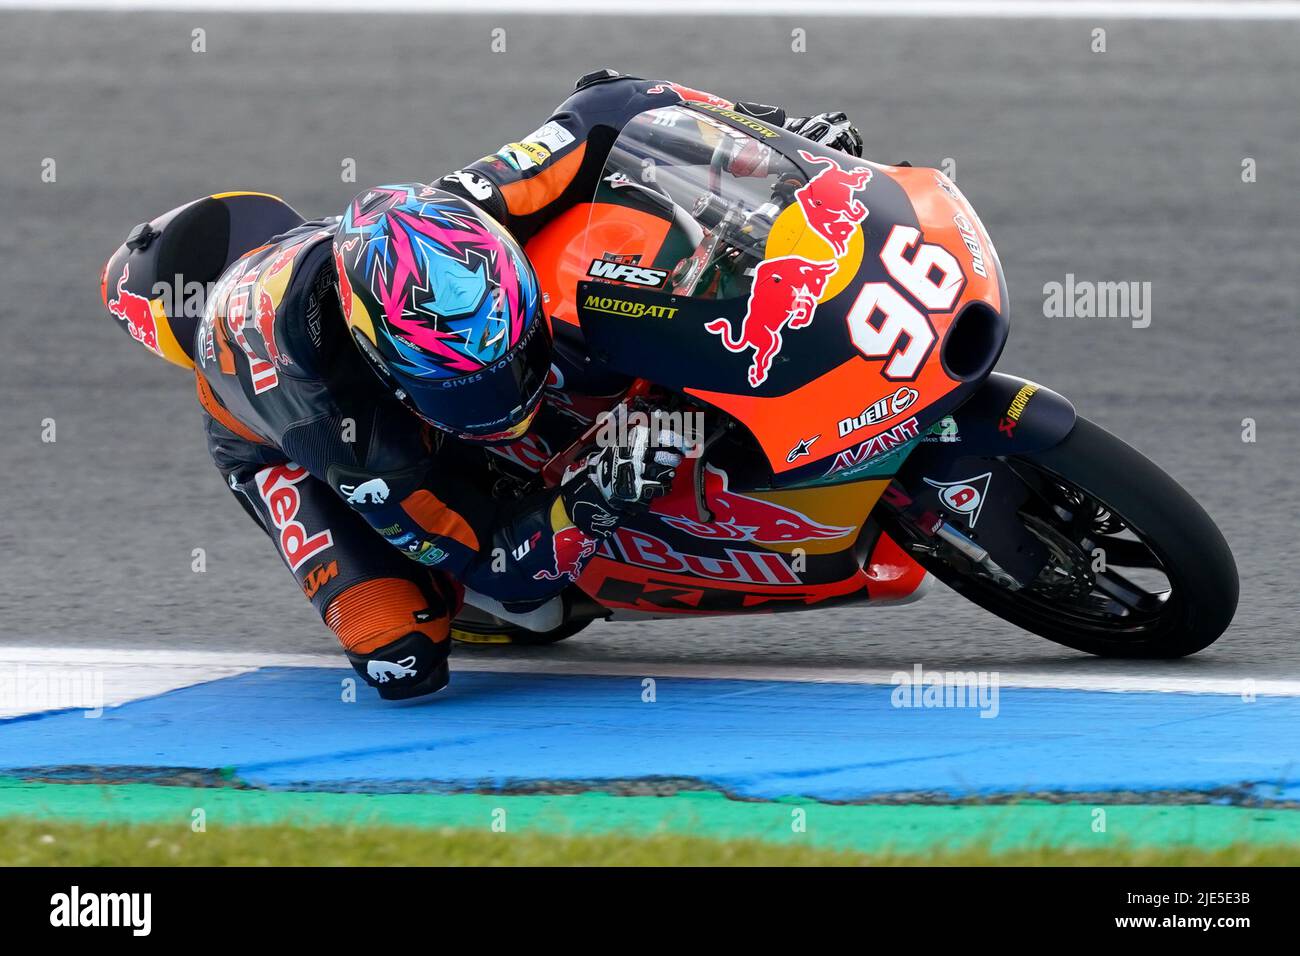 ASSEN, NETHERLANDS - JUNE 25: Daniel Holgado of Red Bull KTM Ajo and Spain during Qualifying for the MotoGP3 of Netherlands at TT Assen on June 25, 2022 in Assen, Netherlands. (Photo by Andre Weening/Orange Pictures) Stock Photo